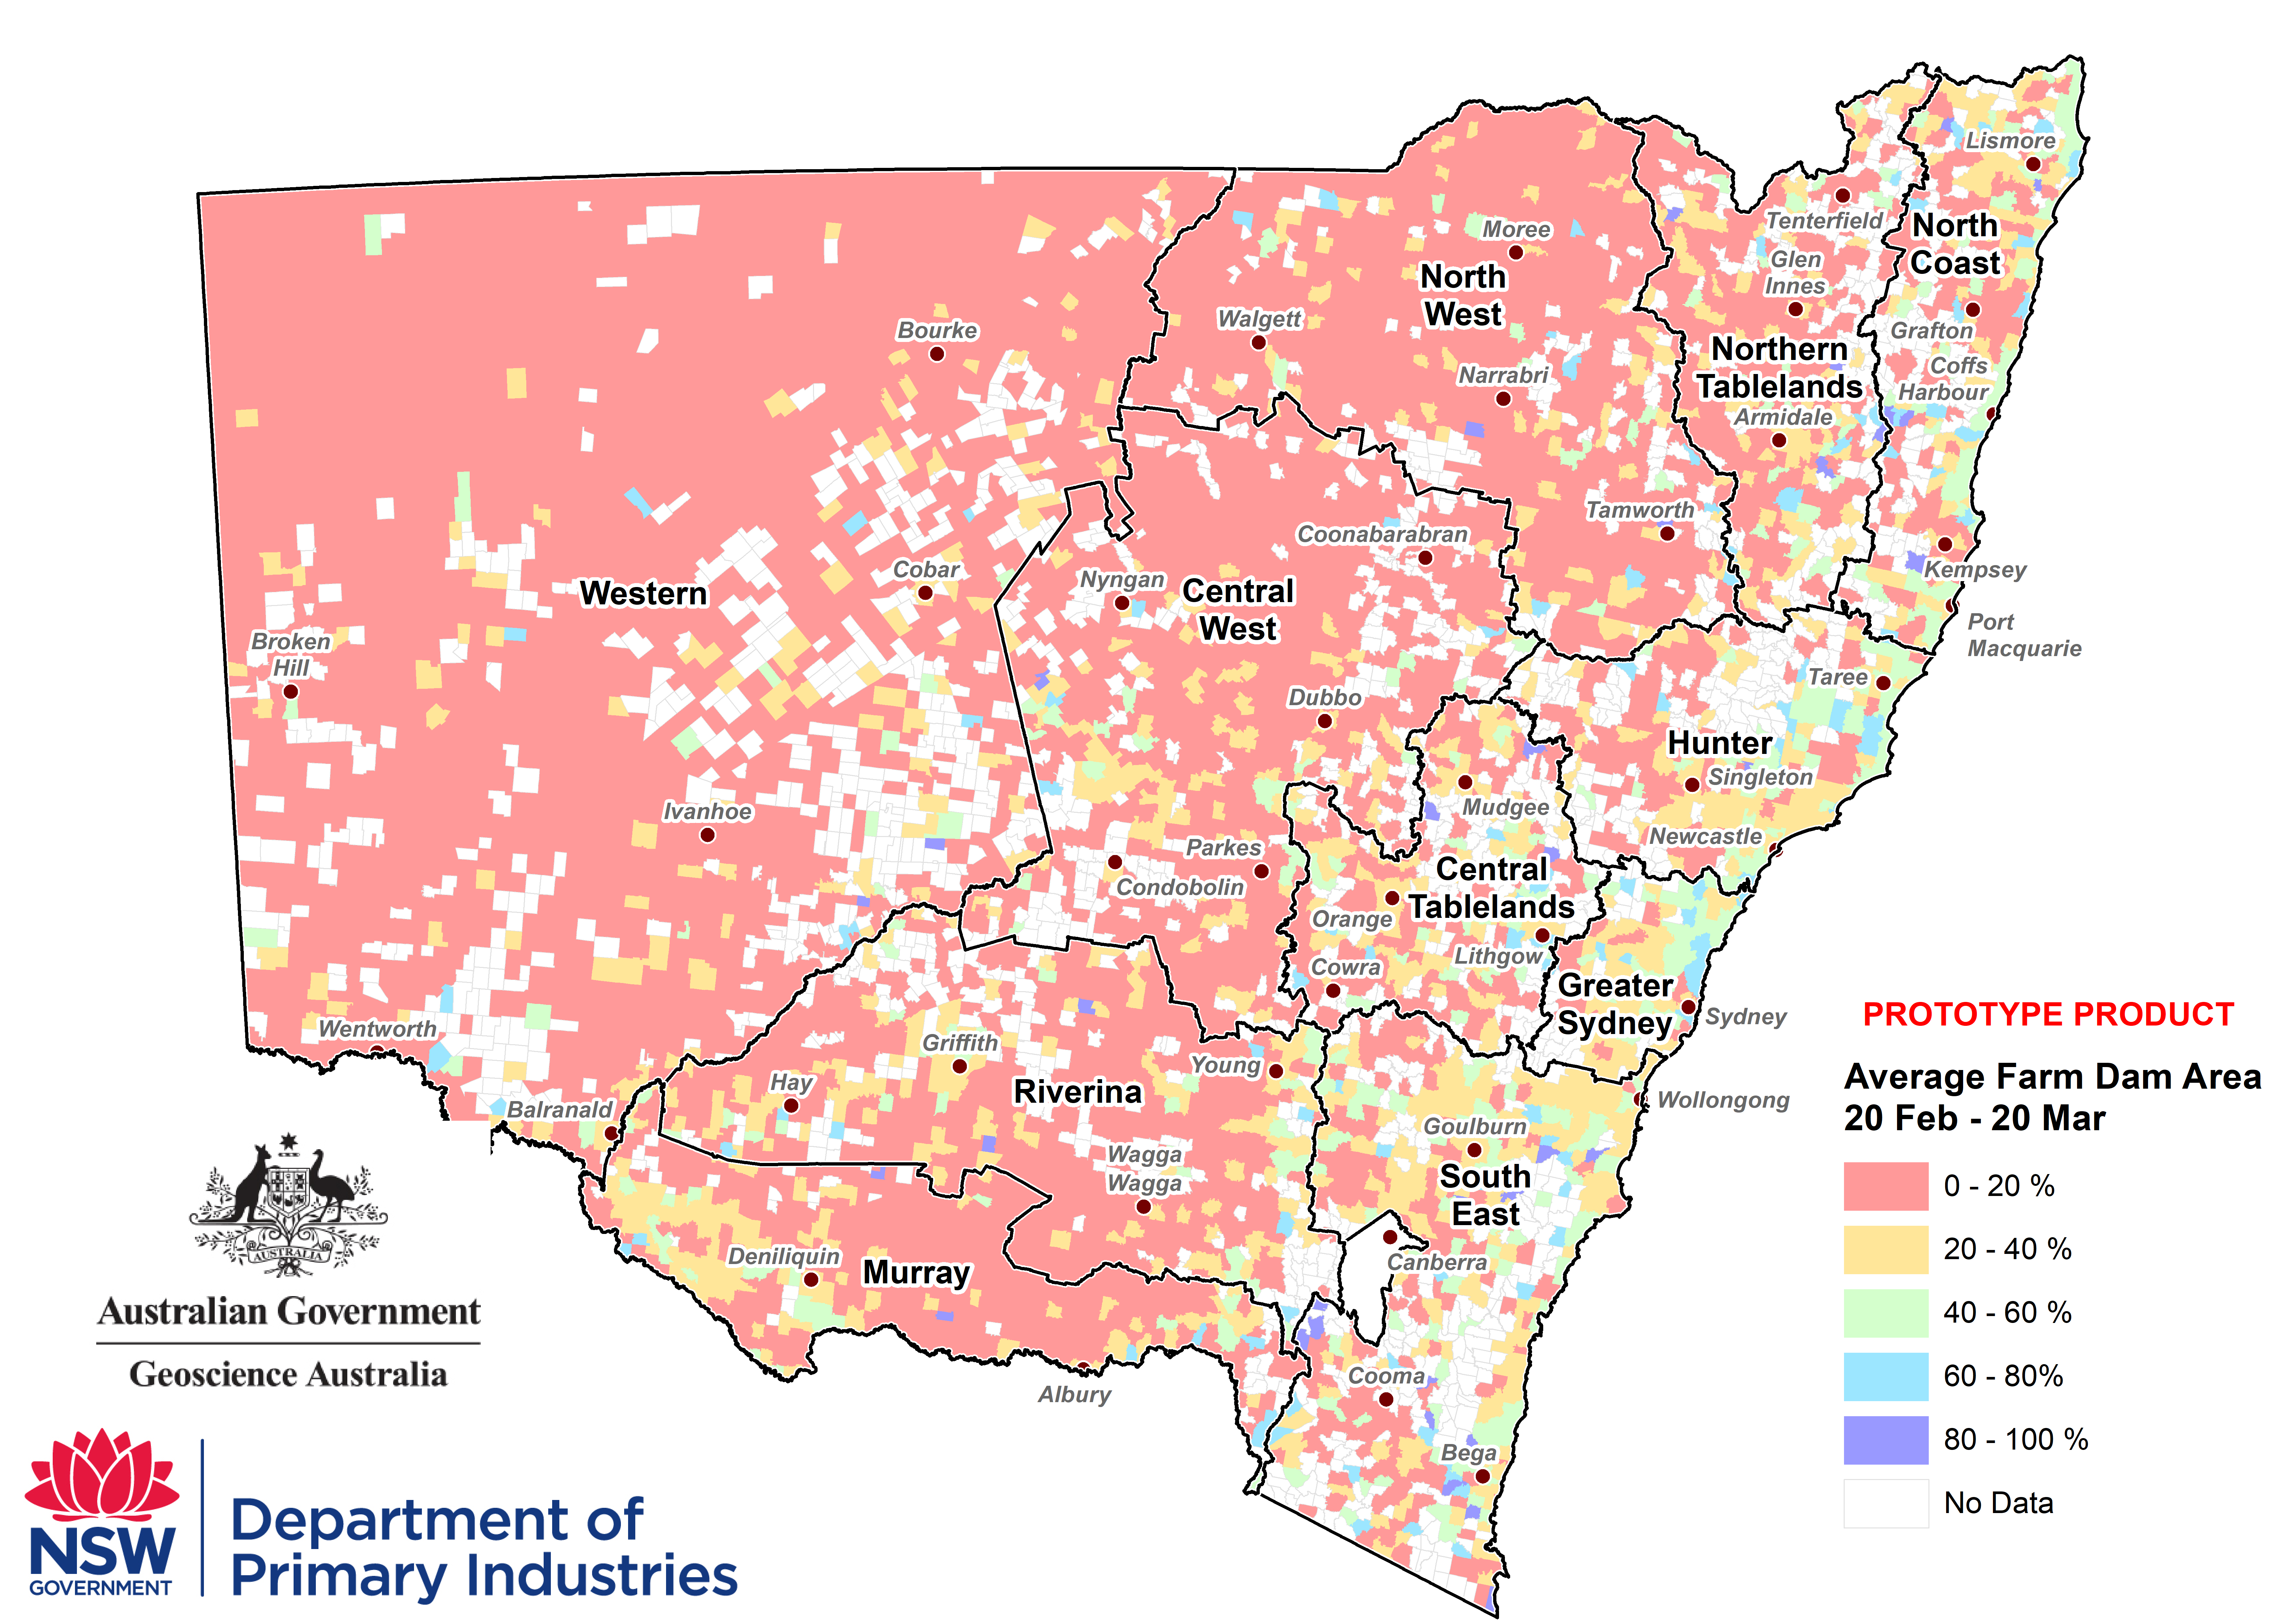 Average parish-level farm dam extents between 20 February to 20 March 2019 - For an accessible explanation of this image contact scott.wallace@dpi.nsw.gov.au